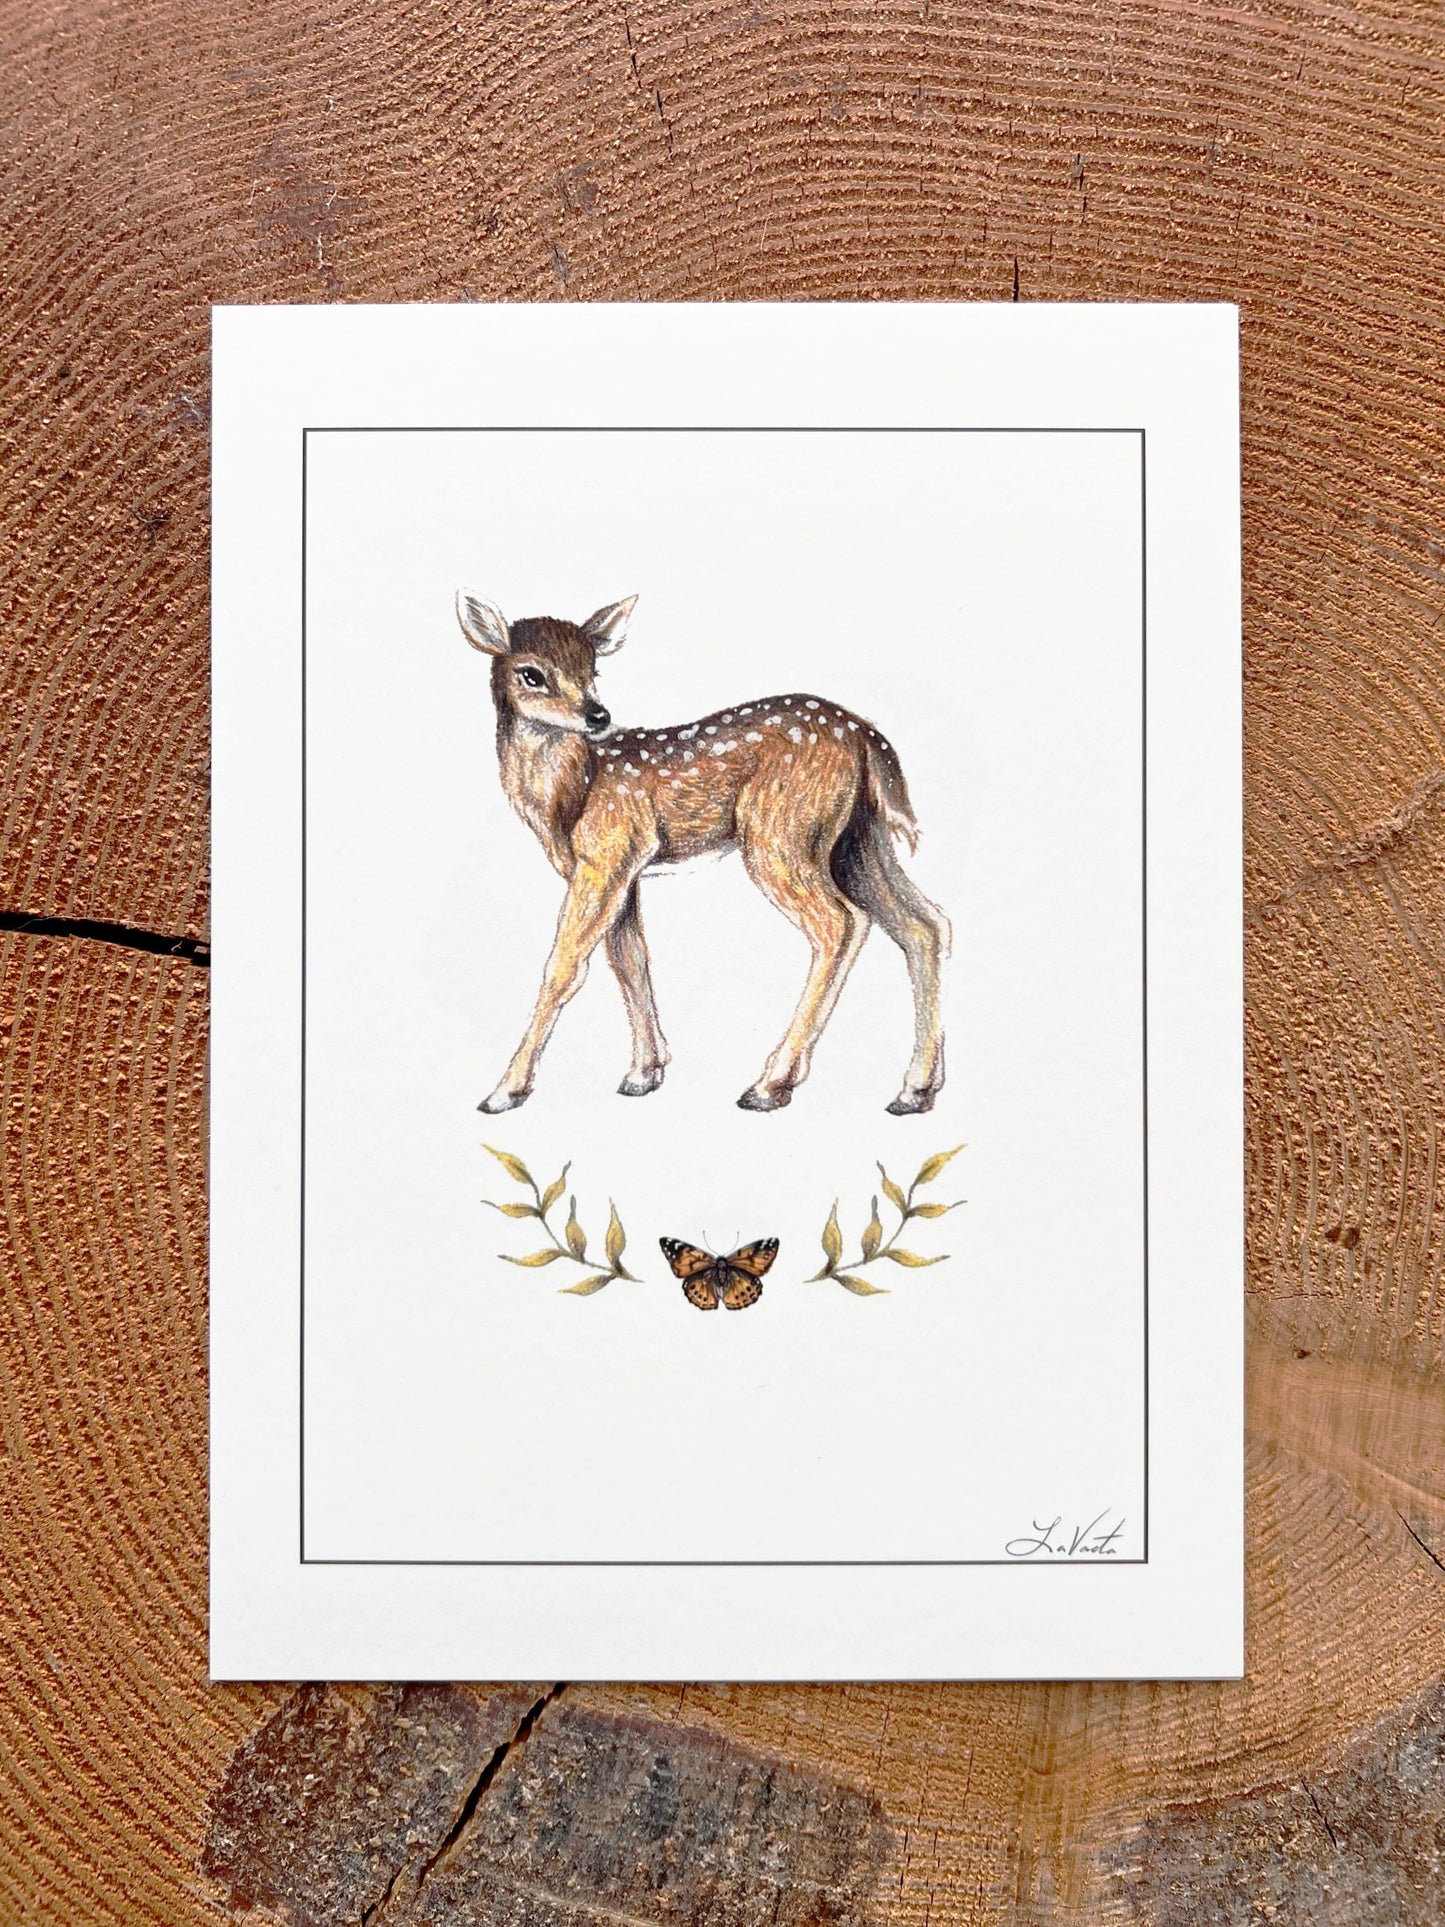 Fawn and Painted Lady Butterfly - Illustration Print Fine Art Prints Native Fauna Art 